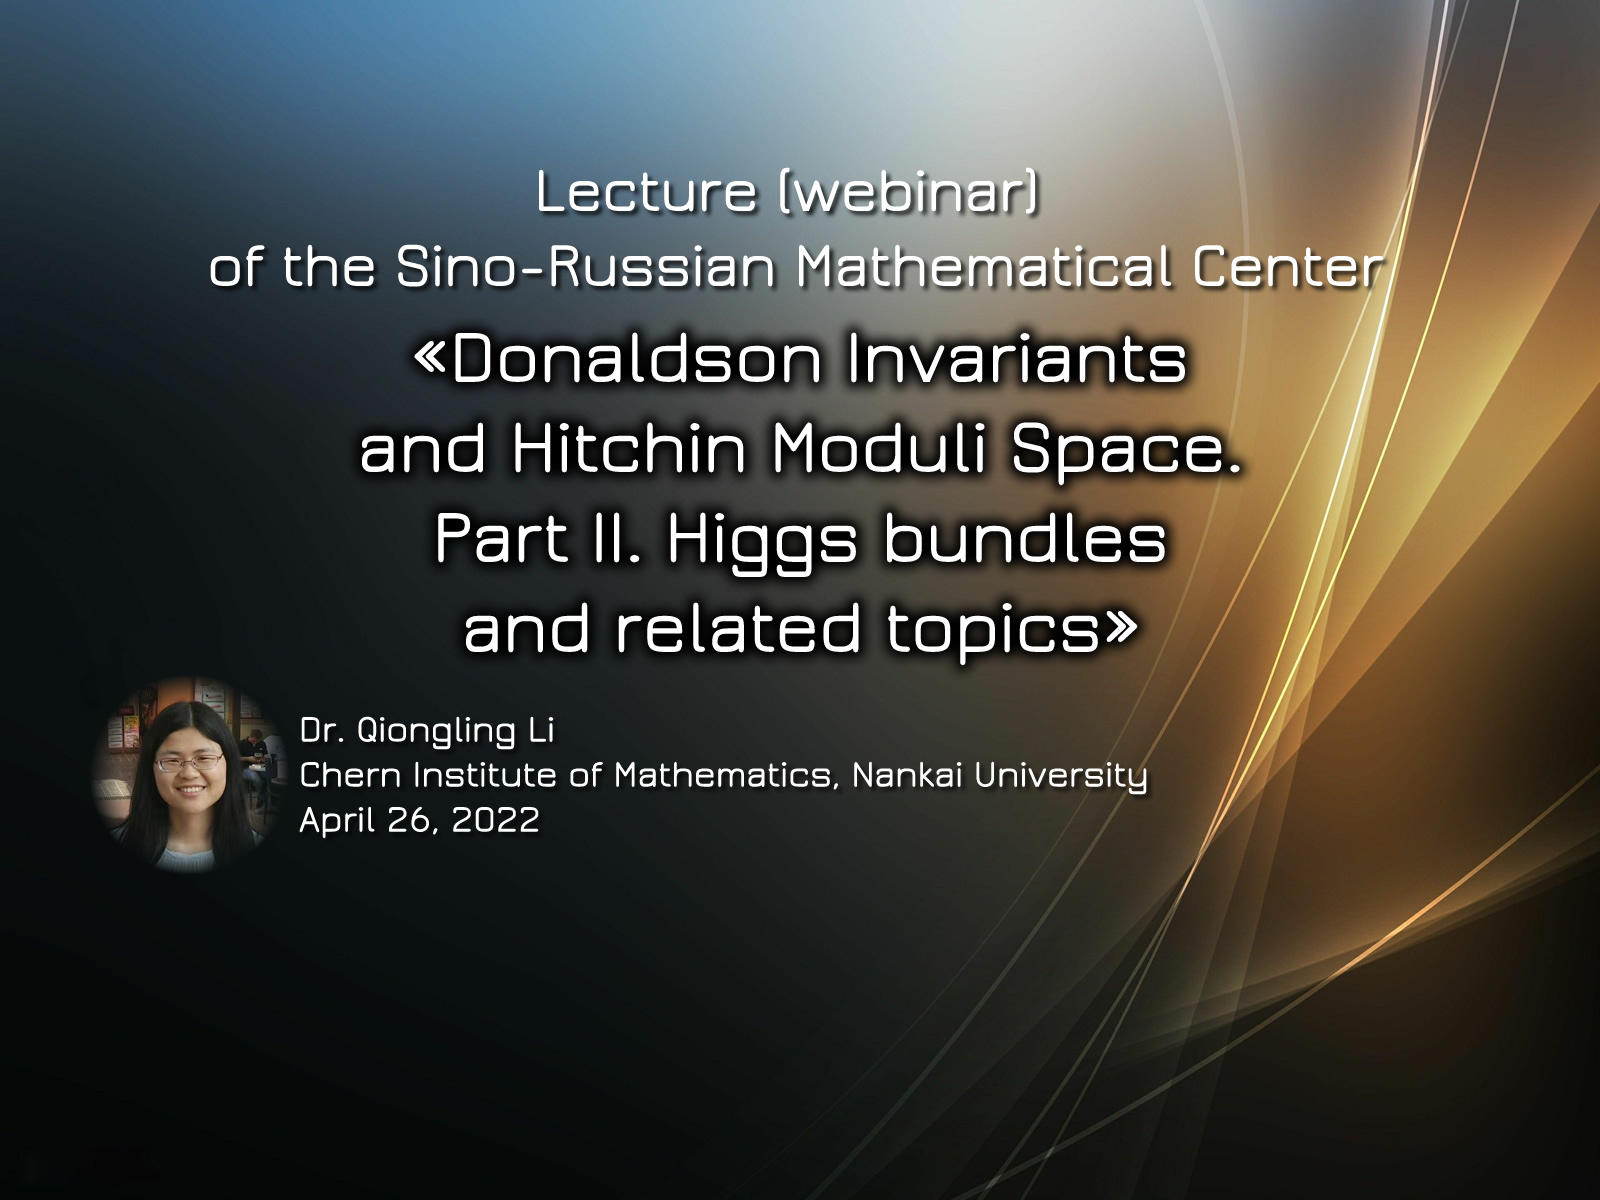 «Higgs bundles and related topics» 26.04.2022